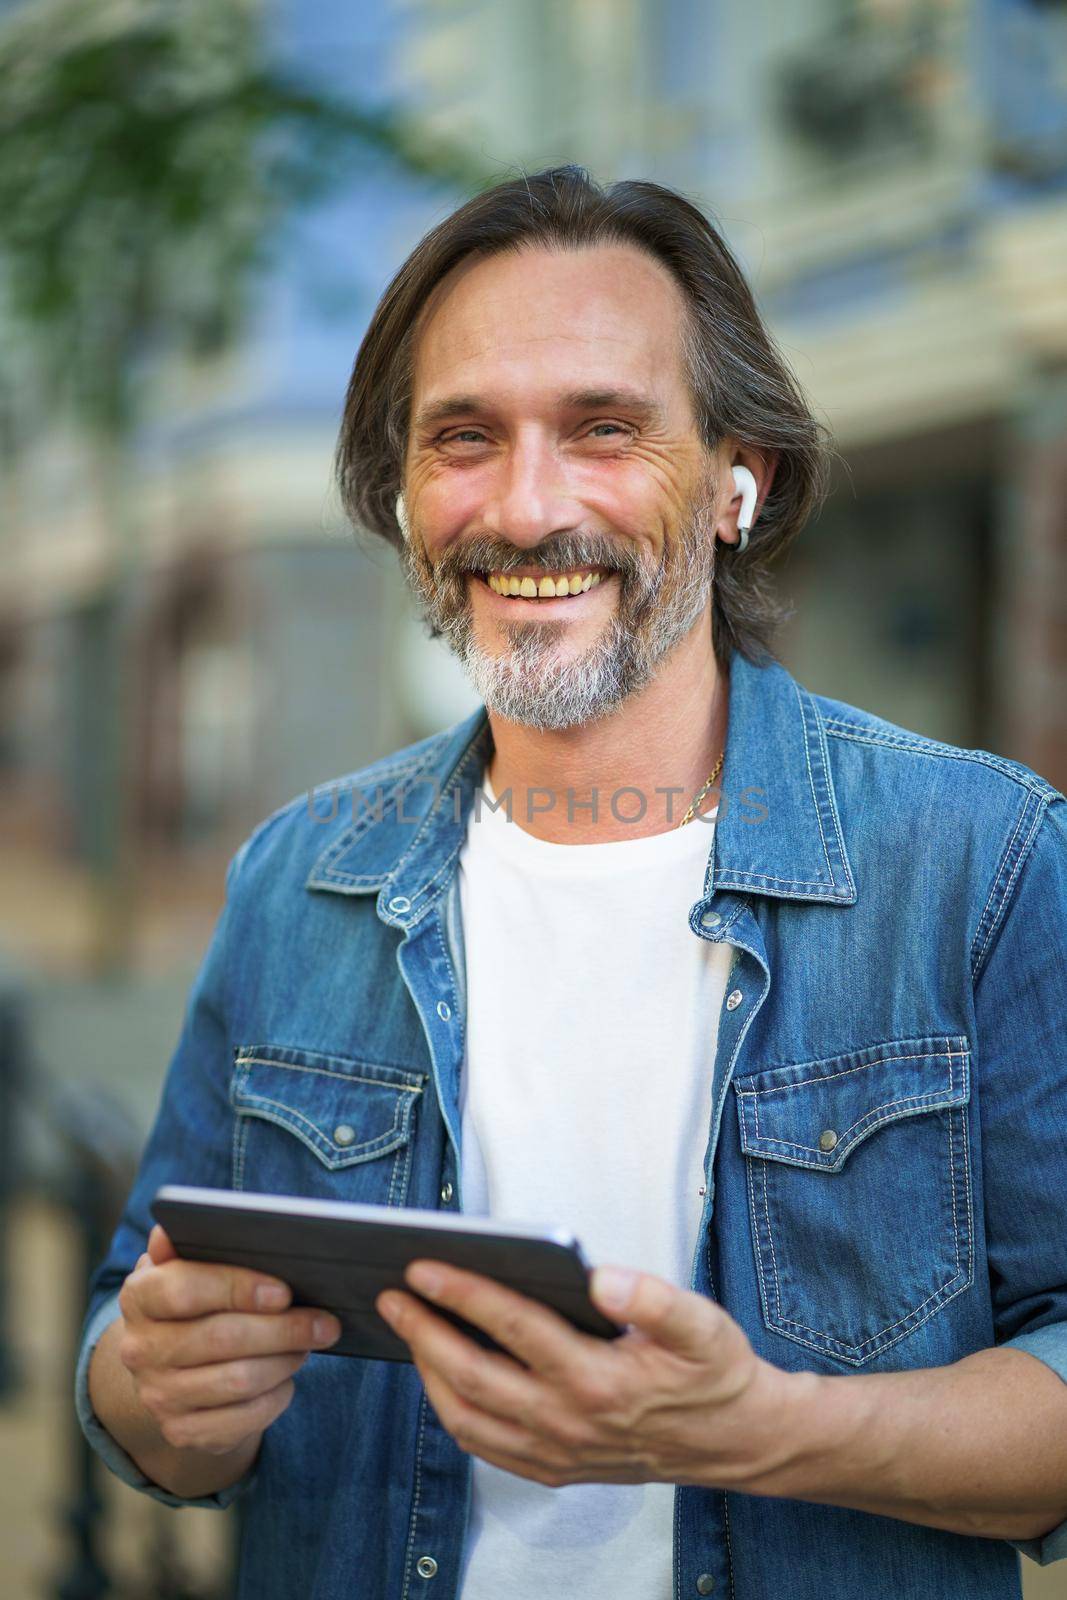 Confident freelancer man with grey haired hold digital tablet in hands having a call while standing on urban streets. Mature man talking or listening music use wireless earphones travel old town.